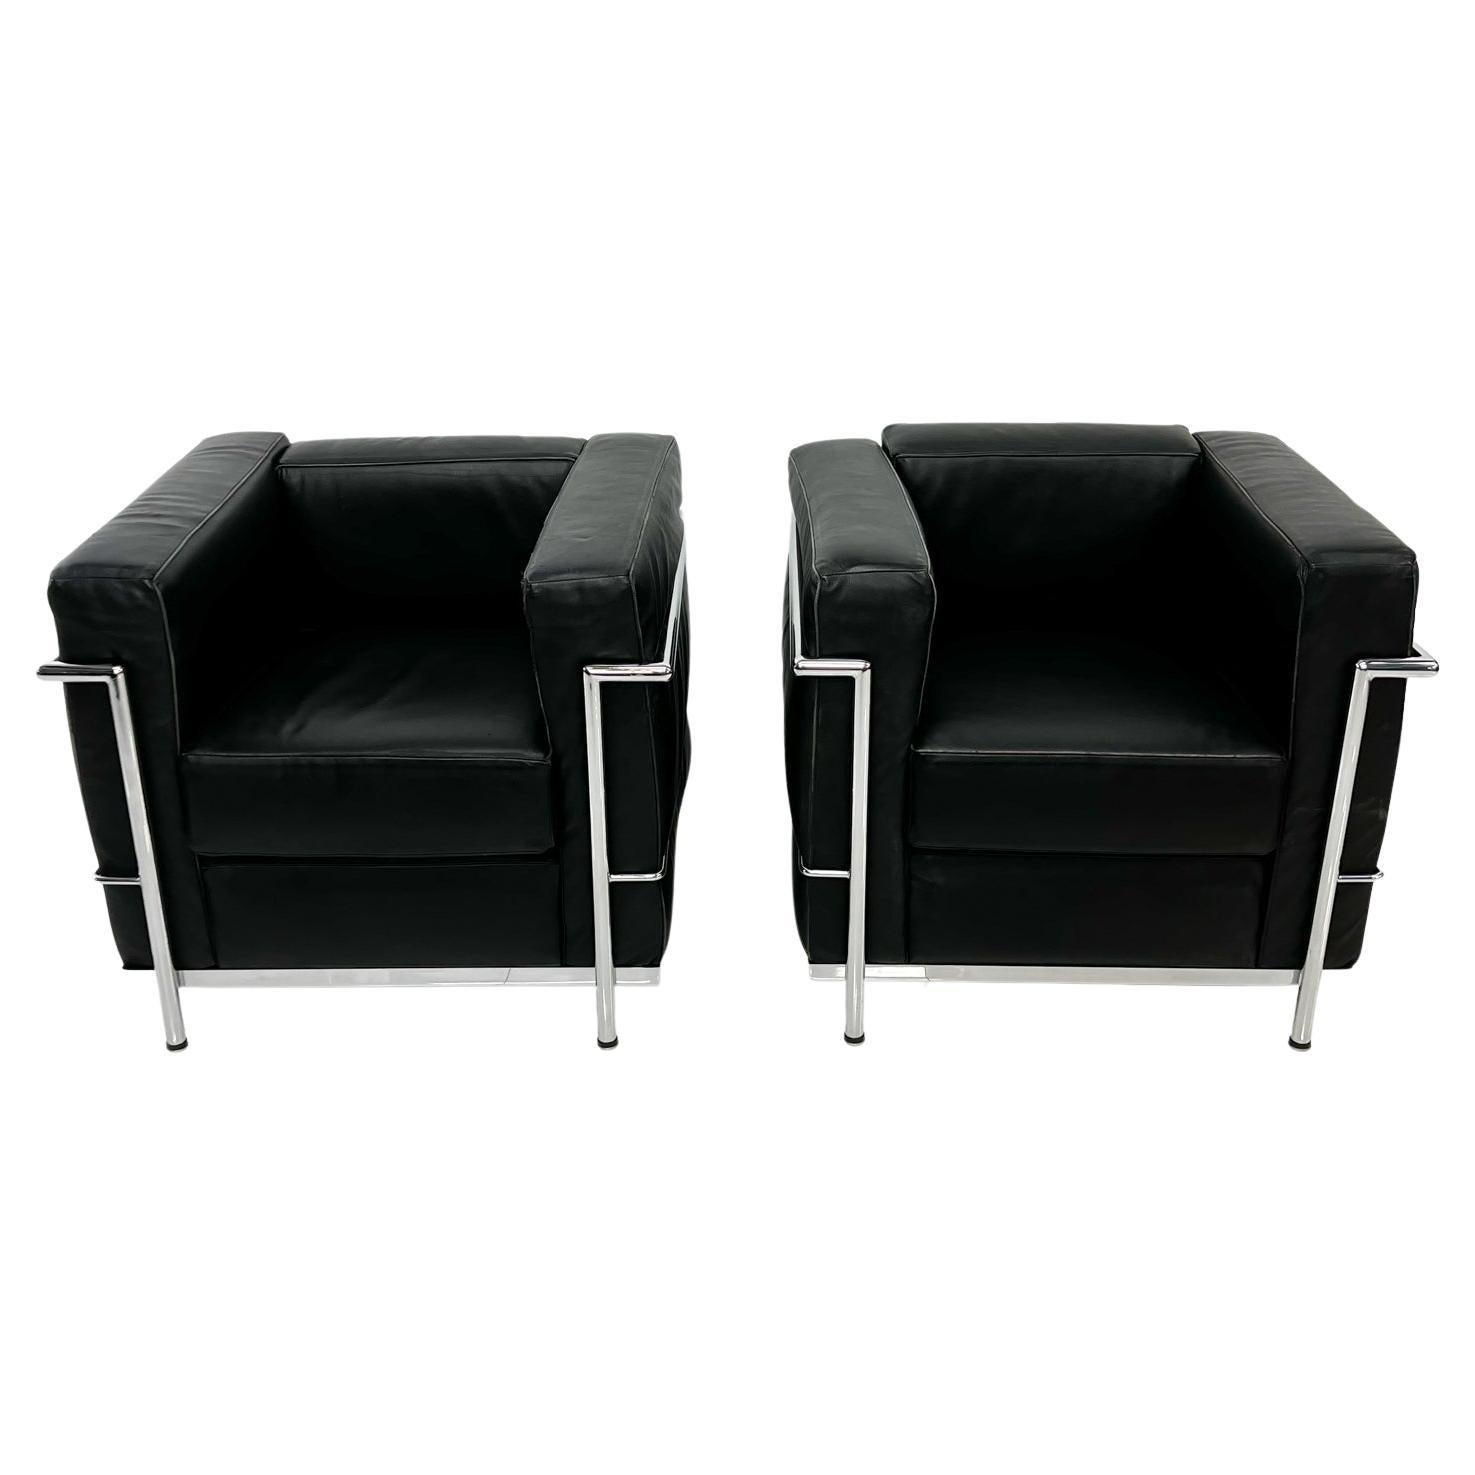 1980s LC2 Black Leather Club Chairs by Le Corbusier for Alivar Made Italy